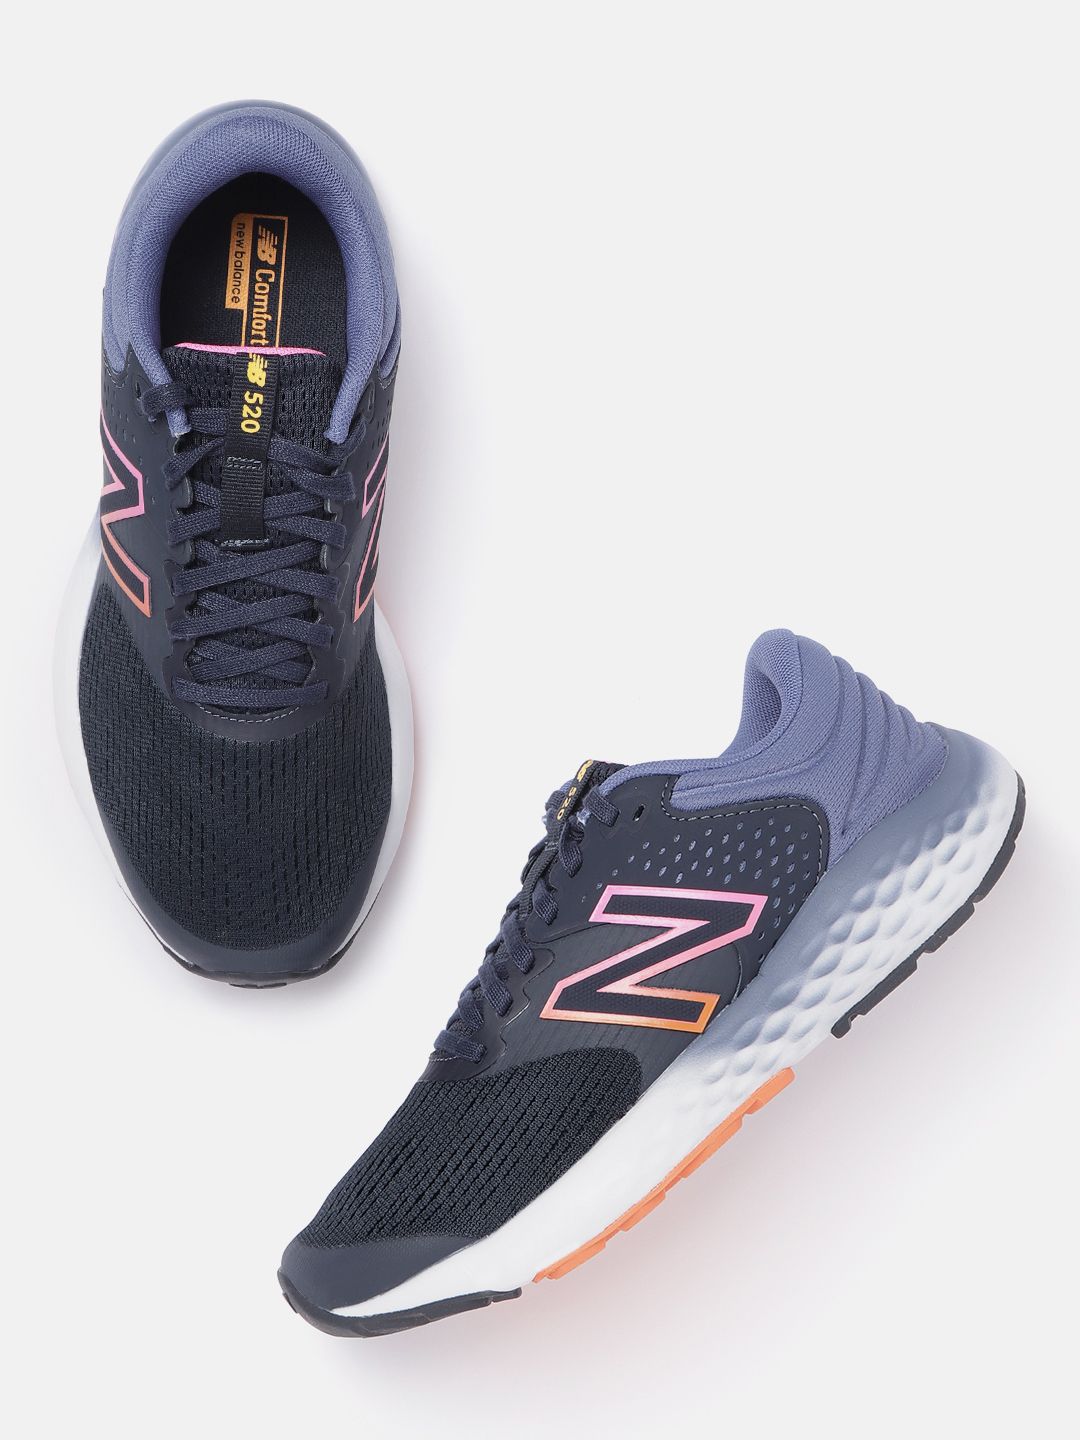 New Balance Women Blue Woven Design 520 Running Shoes Price in India